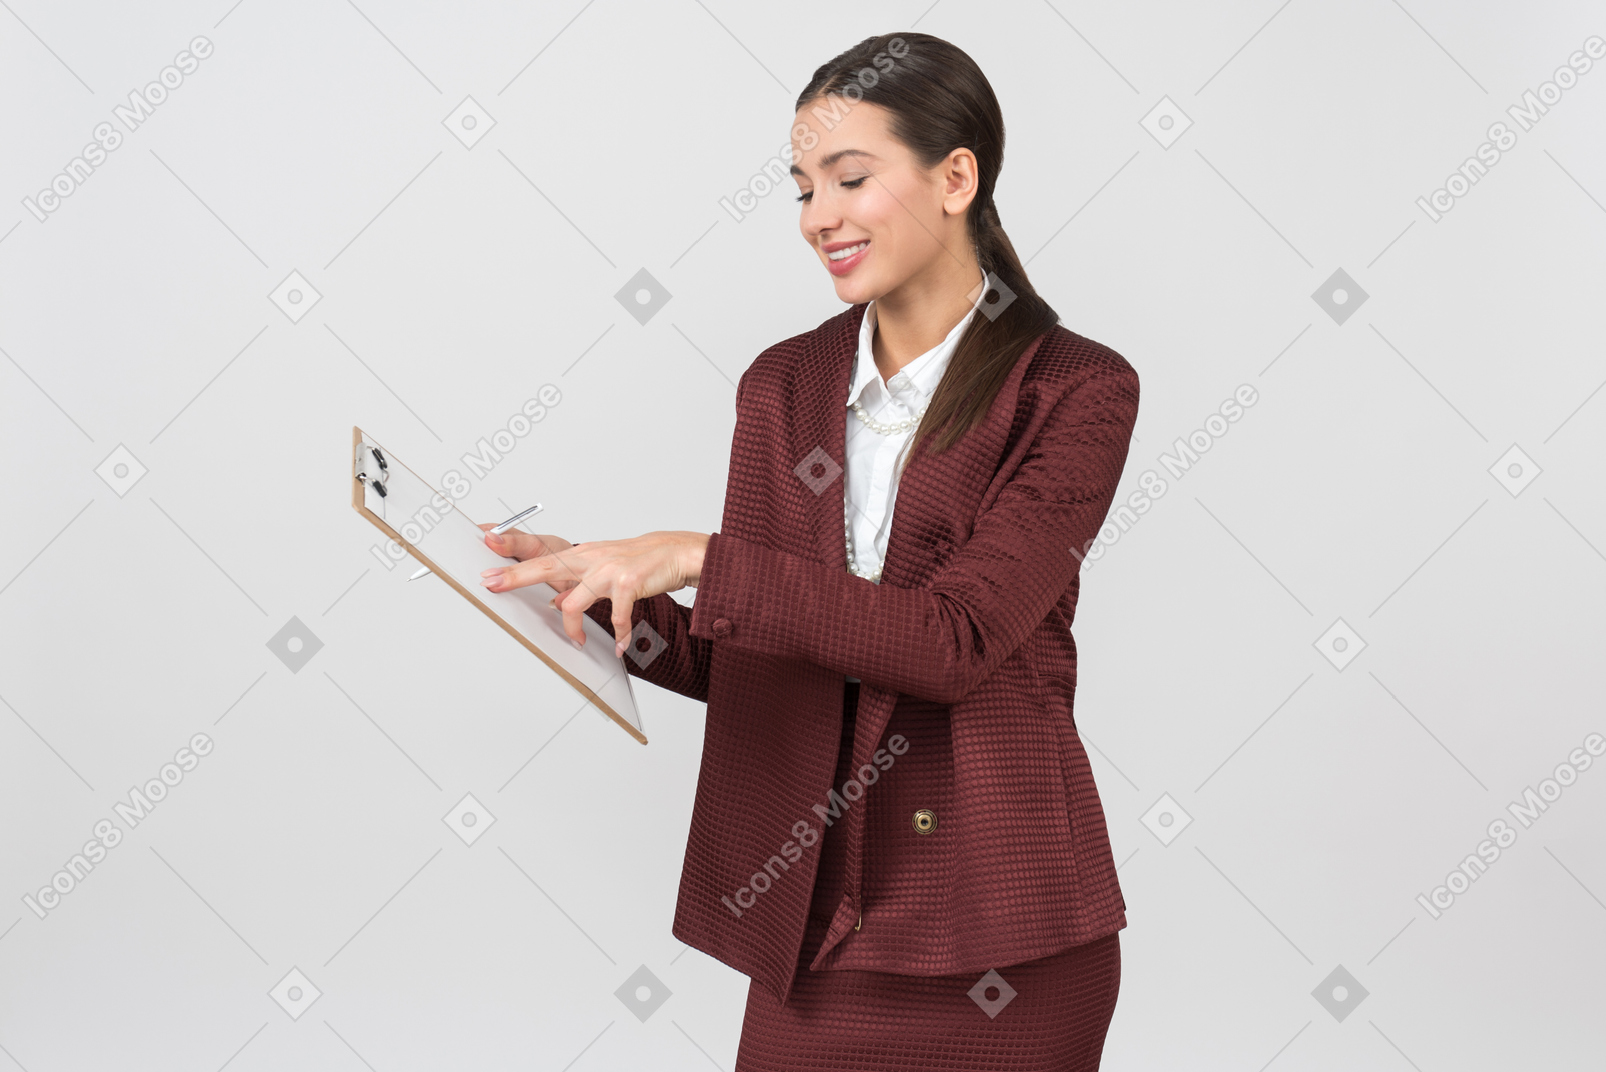 Attractive formally dressed woman checking notes